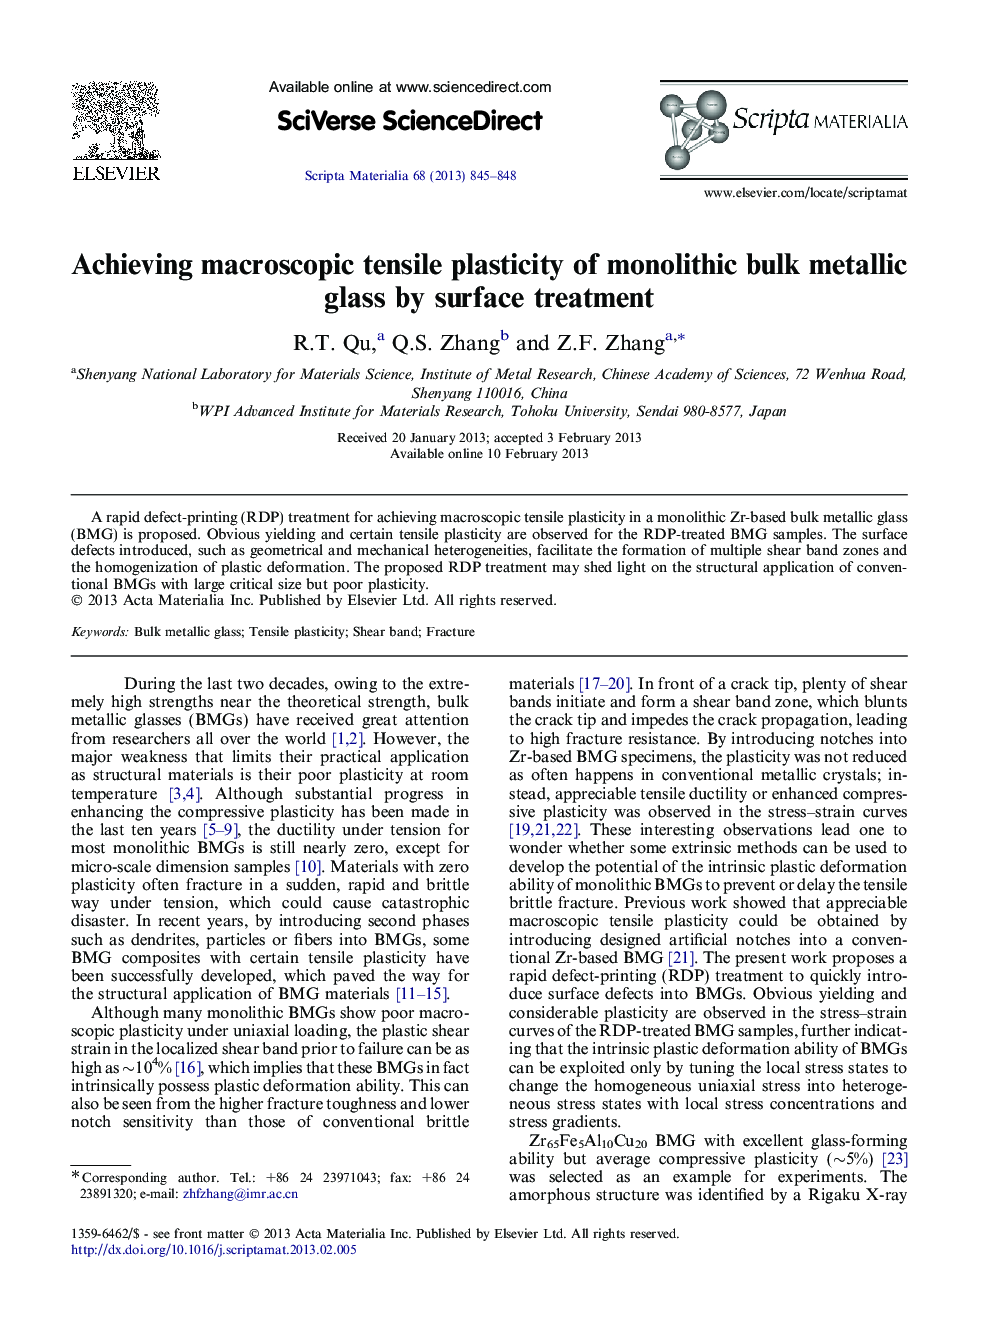 Achieving macroscopic tensile plasticity of monolithic bulk metallic glass by surface treatment